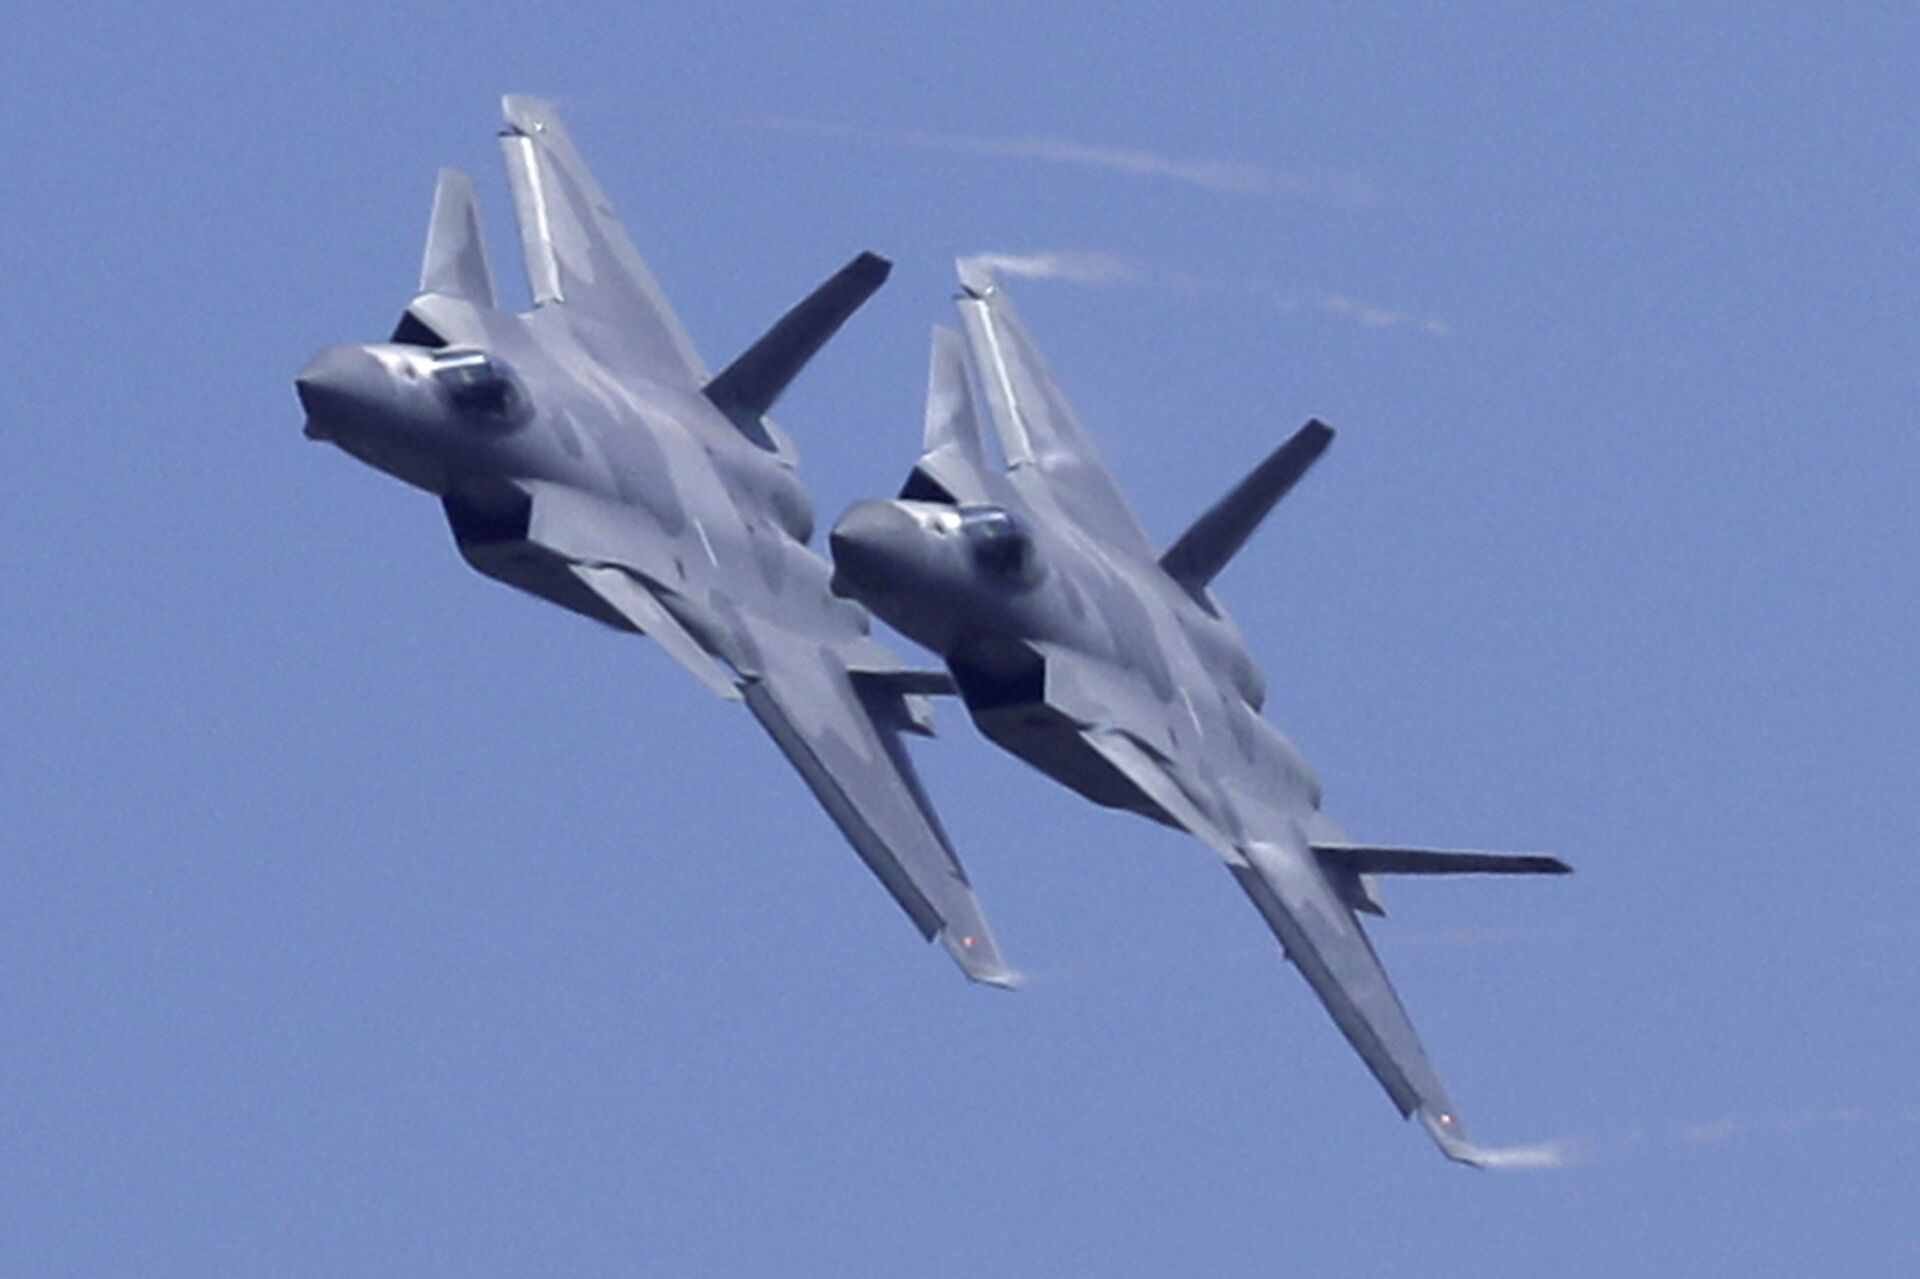 Two J-20 stealth fighter jets of the Chinese People's Liberation Army (PLA) Air Force performs during the 12th China International Aviation and Aerospace Exhibition, also known as Airshow China 2018, Tuesday, Nov. 6, 2018, in Zhuhai city, south China's Guangdong province - Sputnik International, 1920, 07.09.2021